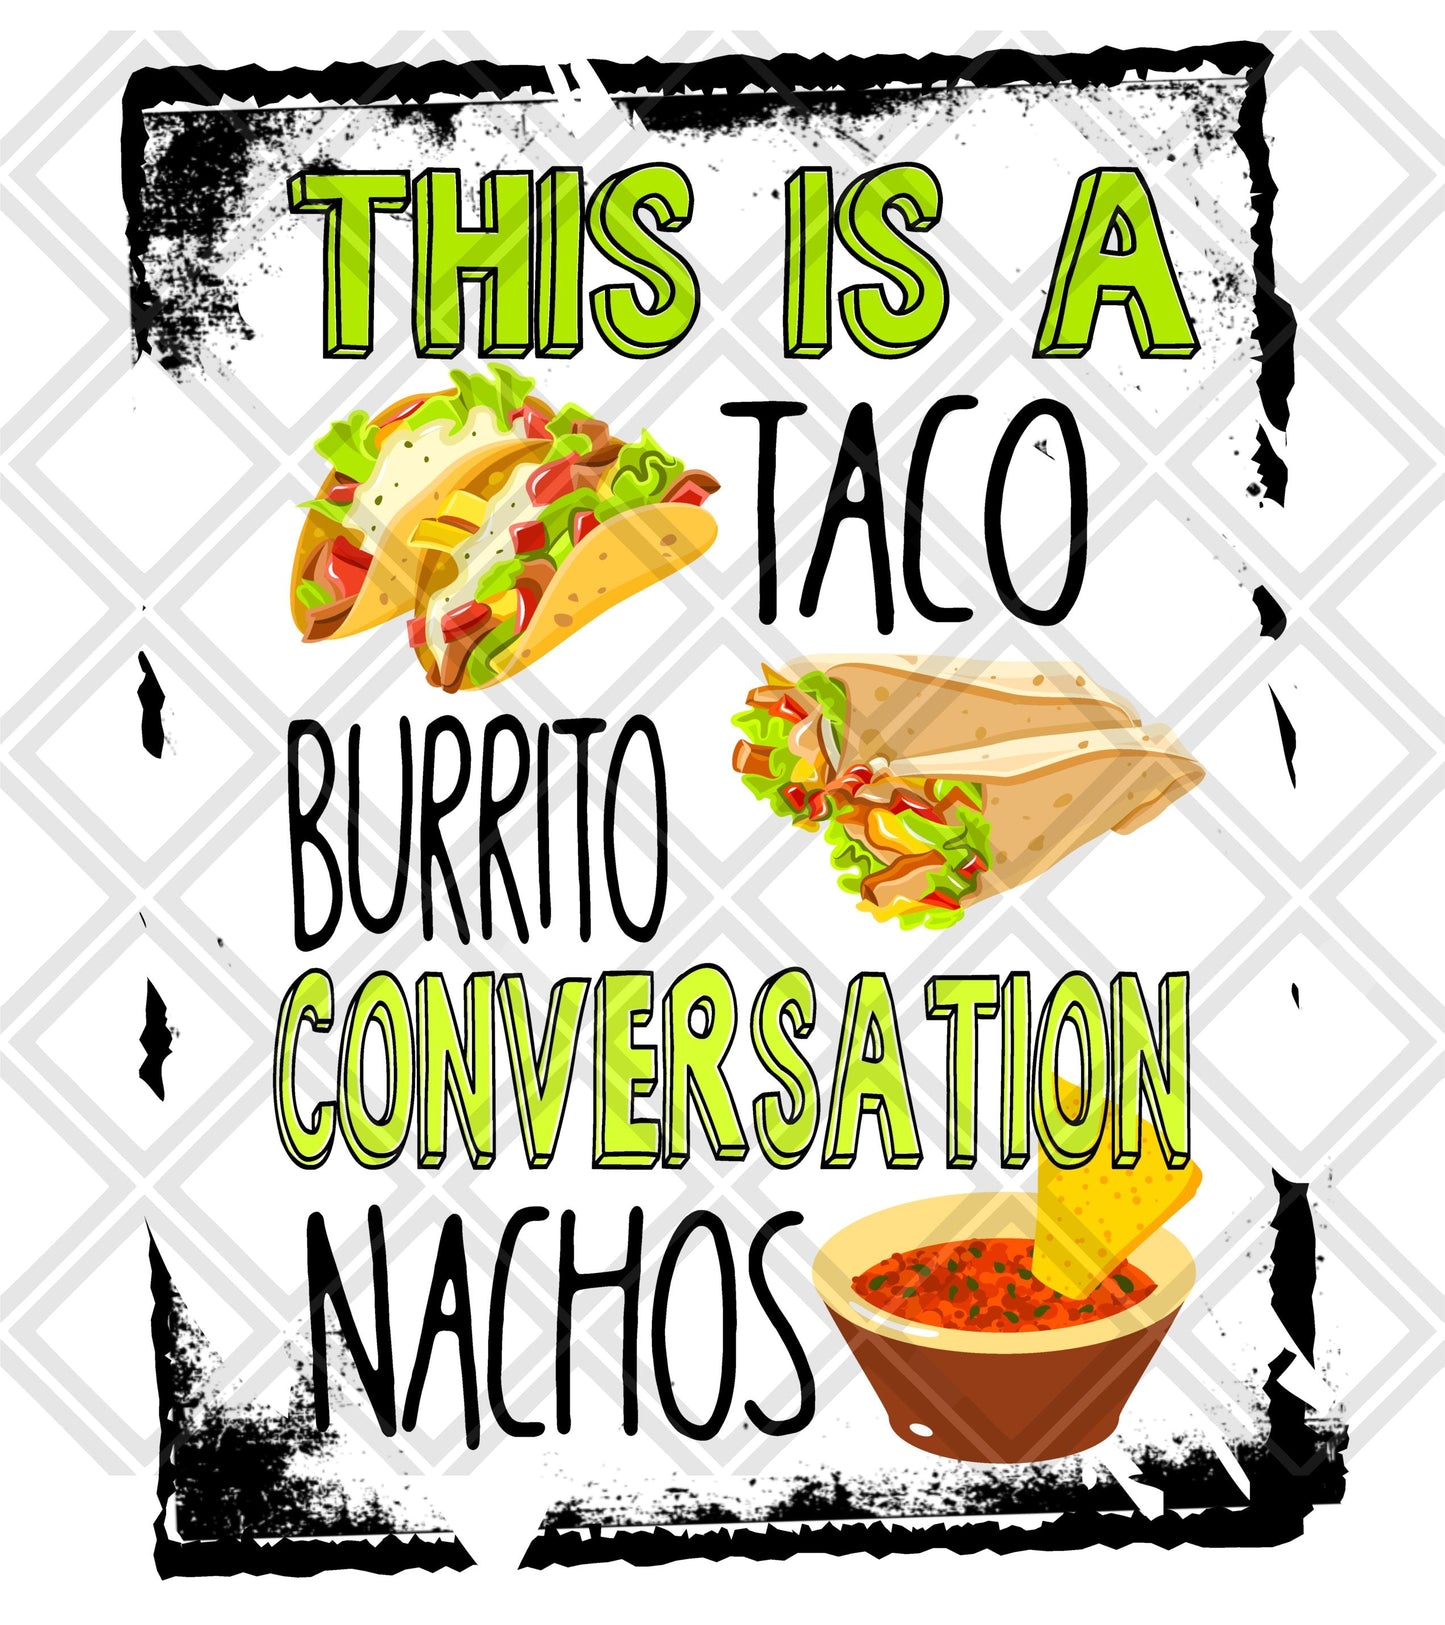 THIS IS A TACO AND BURRITO CONVERSATION NACHOS WITH FRAME  Digital Download Instand Download